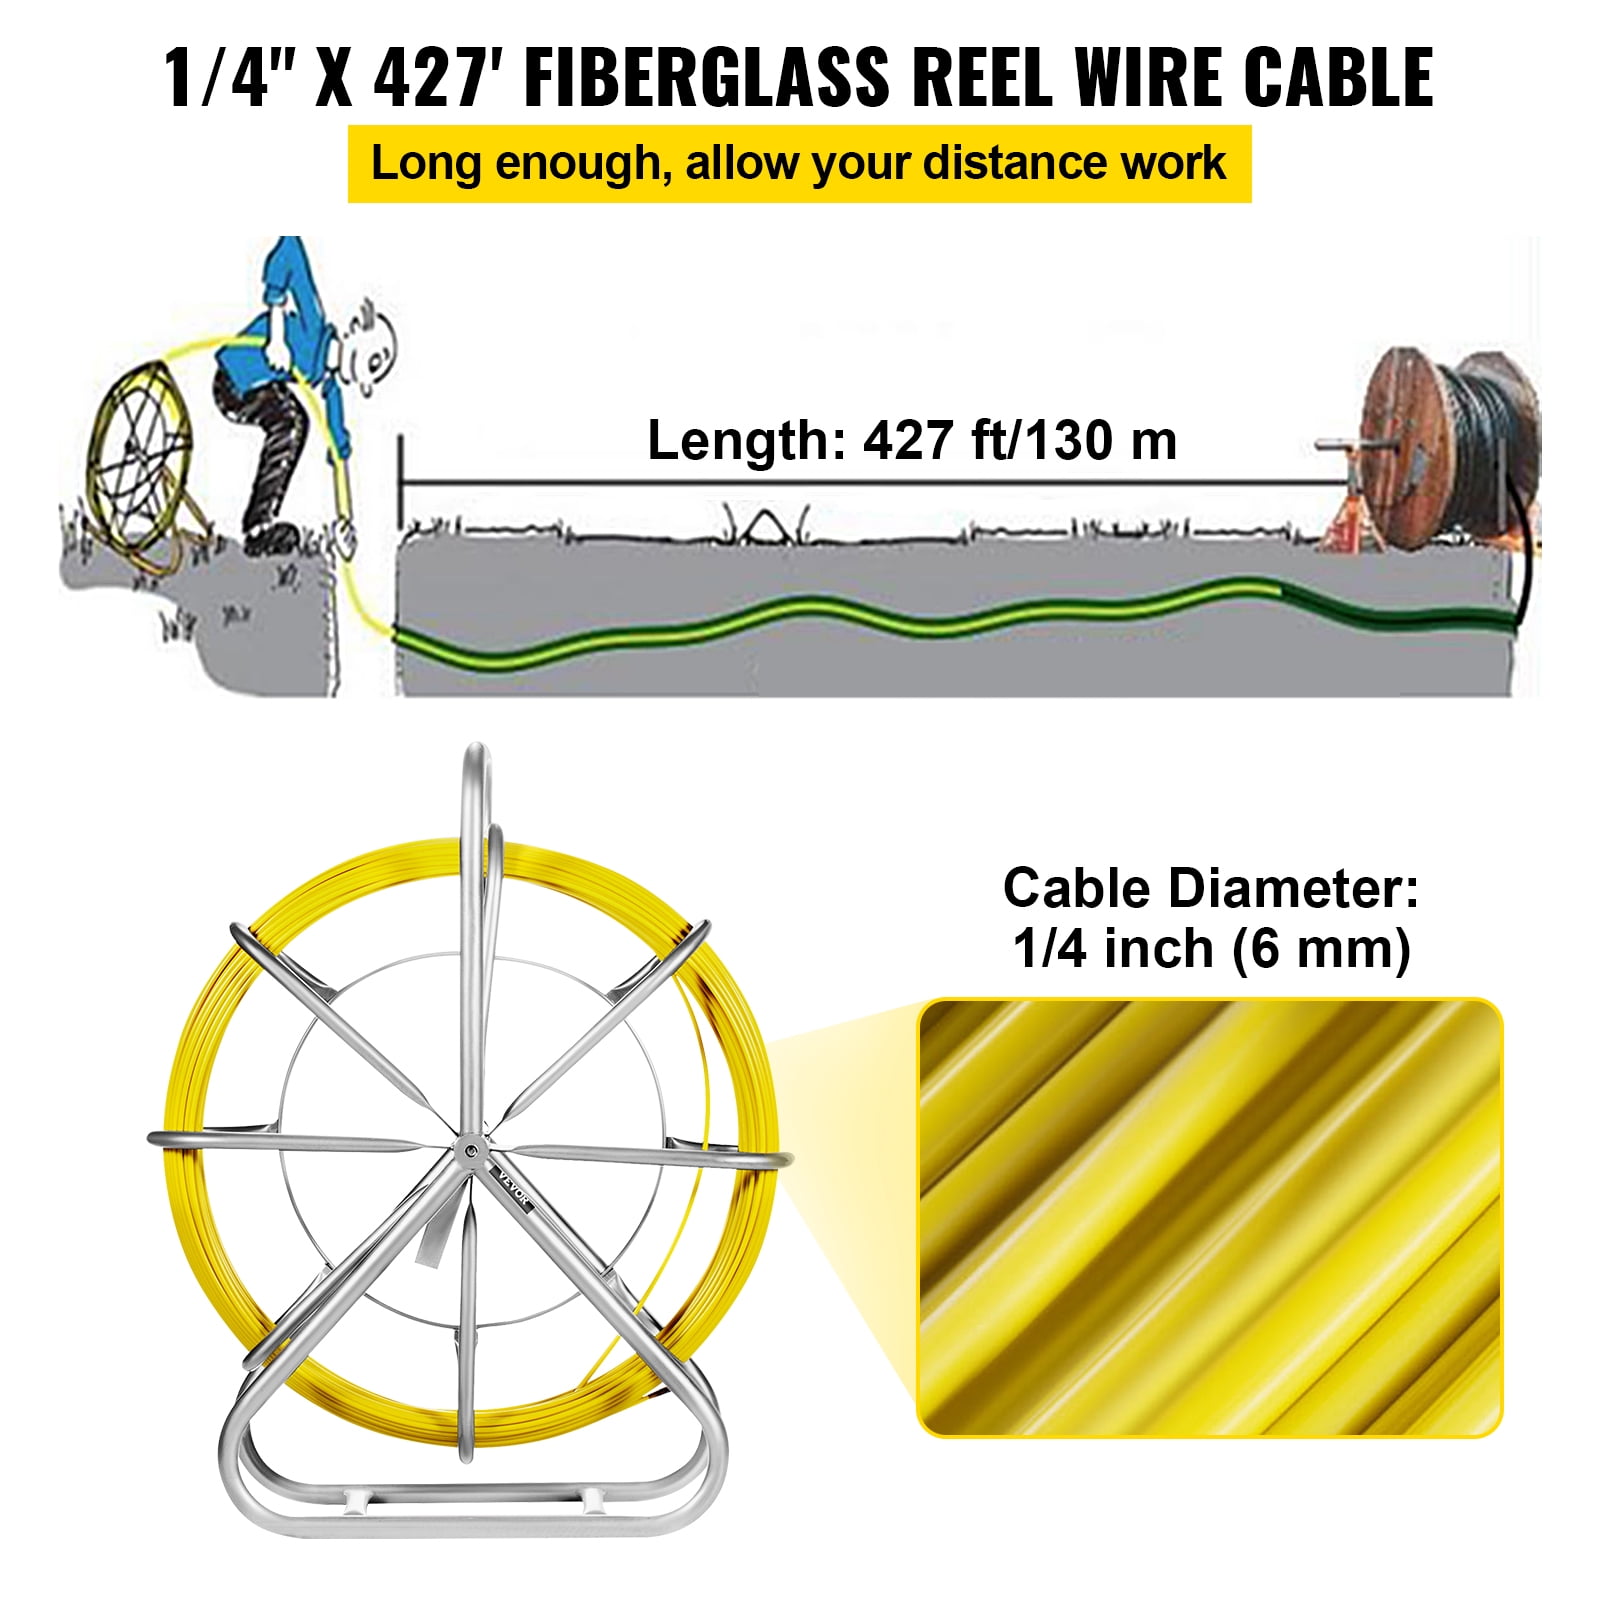 VEVOR Fish Tape Fiberglass 6MM 425ft, Duct Rodder Fish Tape Puller  Fiberglass Wire Cable Running with Cage and Wheel Stand,Durable Steel Reel  Stand,Fish Tape Min Bending Radius 12 inch/300 mm 